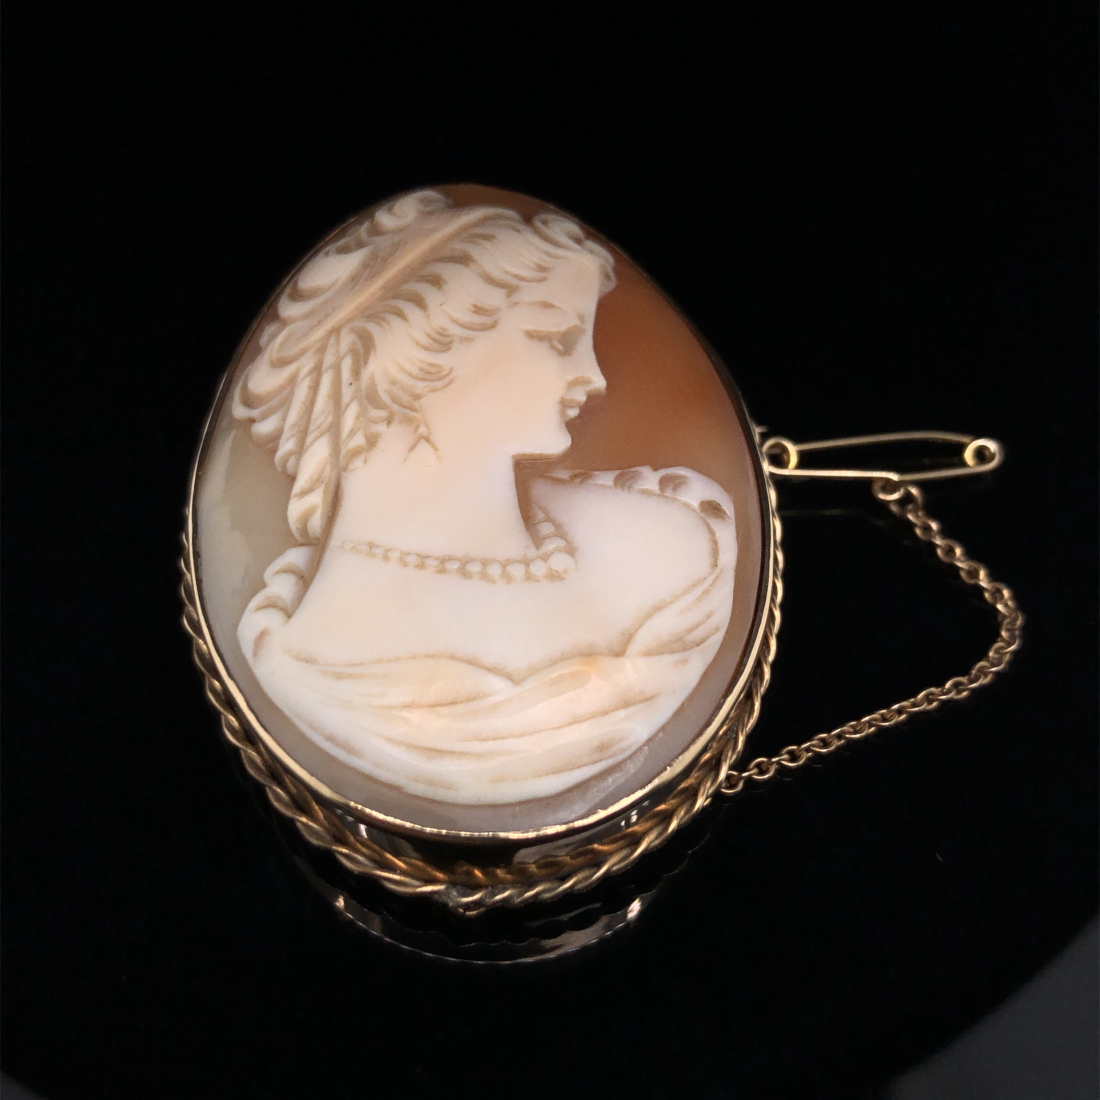 A PORTRAIT CAMEO BROOCH, WITHIN A 9ct STAMPED ROPE EDGE BROOCH FRAME, COMPLETE WITH SAFETY CHAIN.